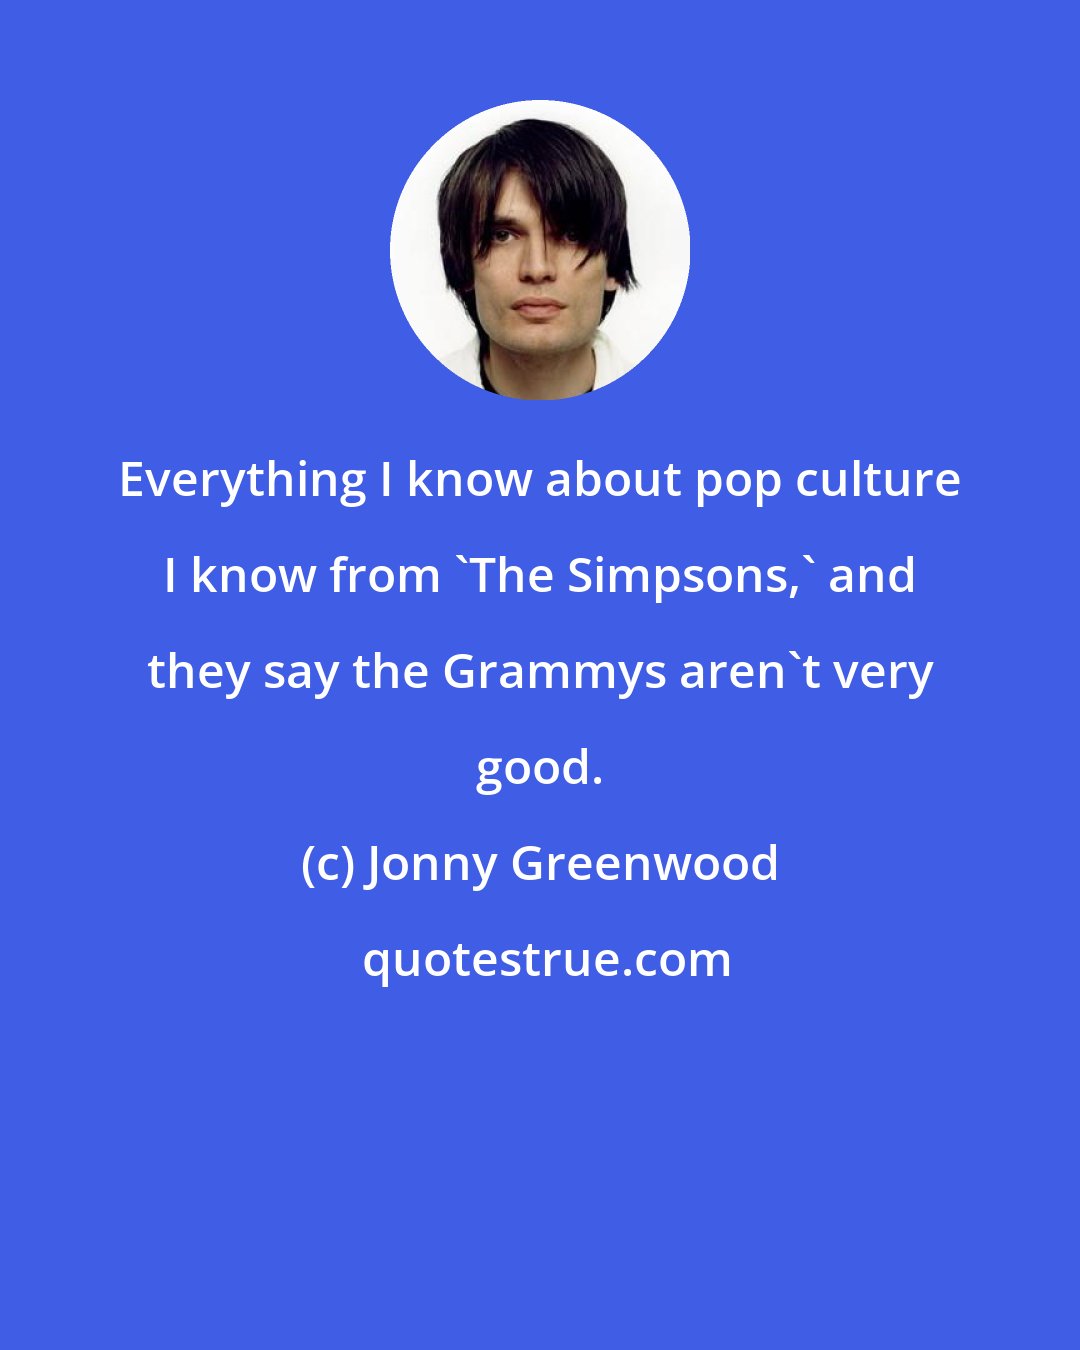 Jonny Greenwood: Everything I know about pop culture I know from 'The Simpsons,' and they say the Grammys aren't very good.